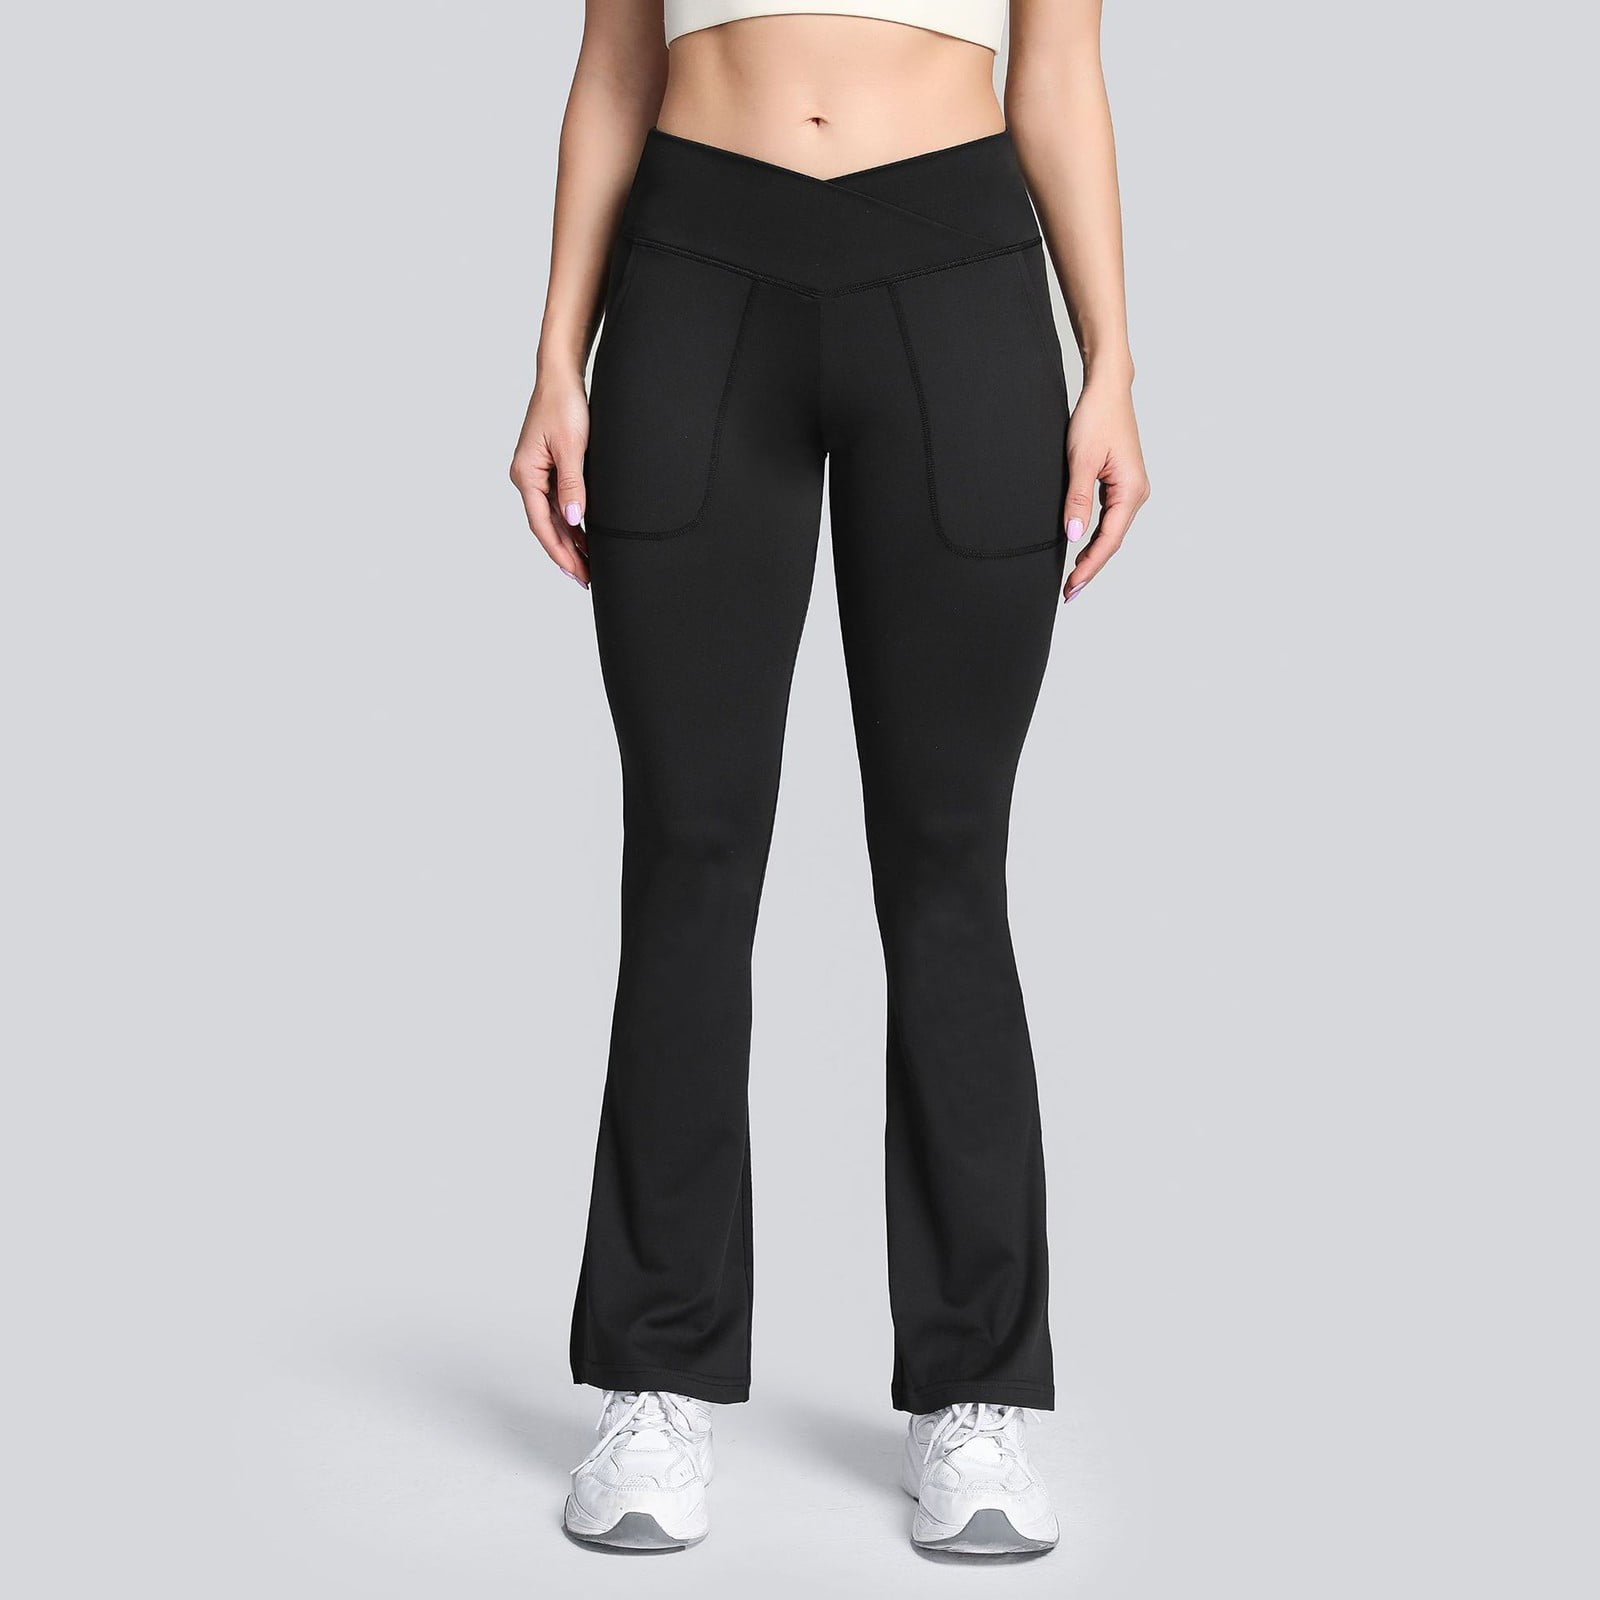 Groove Pants in Black Color for Ladies